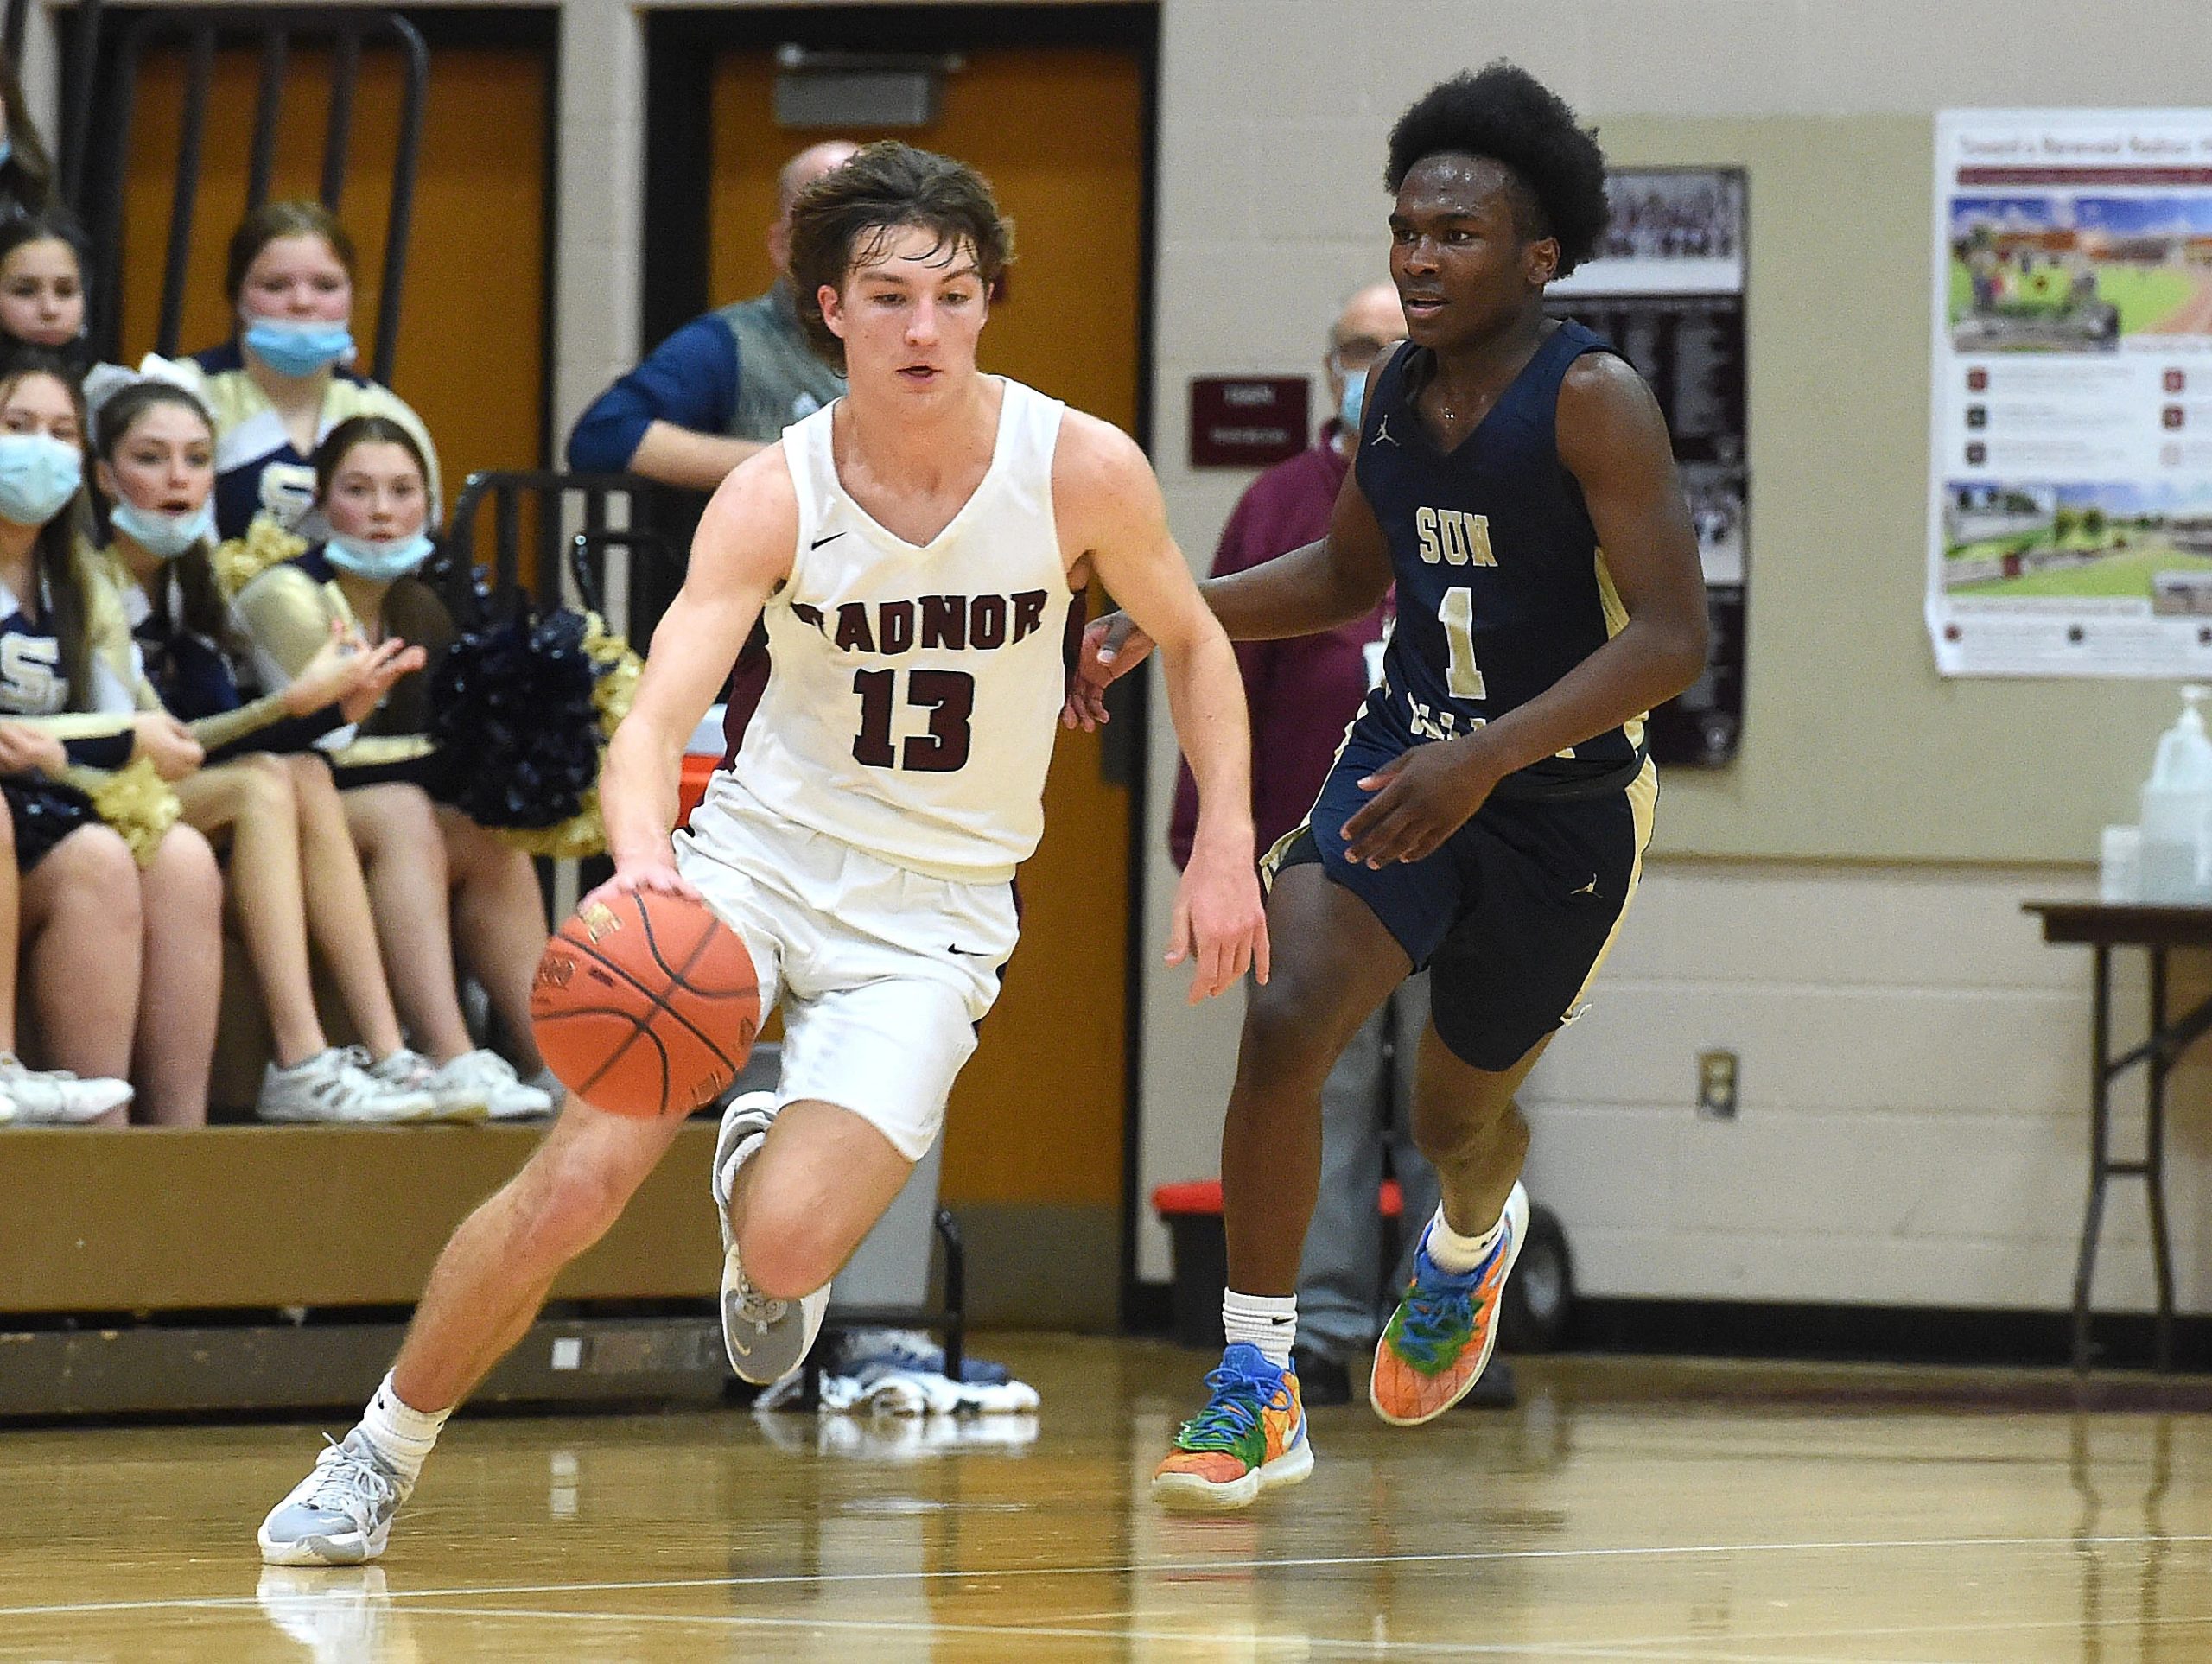 District 1 Boys Basketball With similar builds, Chester and Radnor set for district final showdown